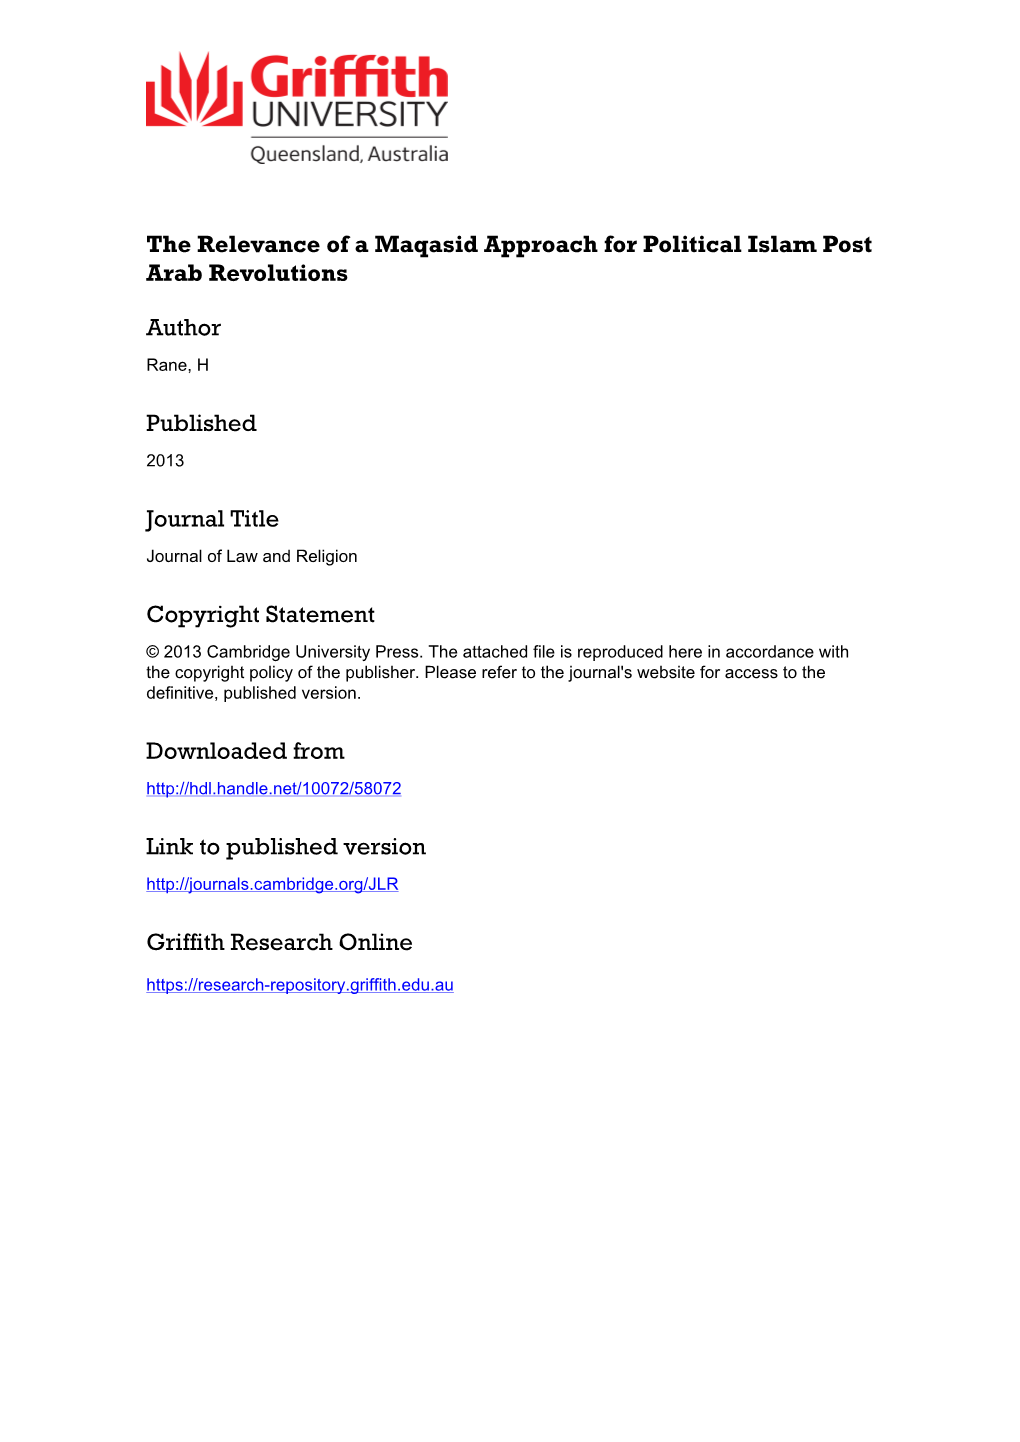 The Relevance of a Maqasid Approach for Political Islam Post Arab Revolutions